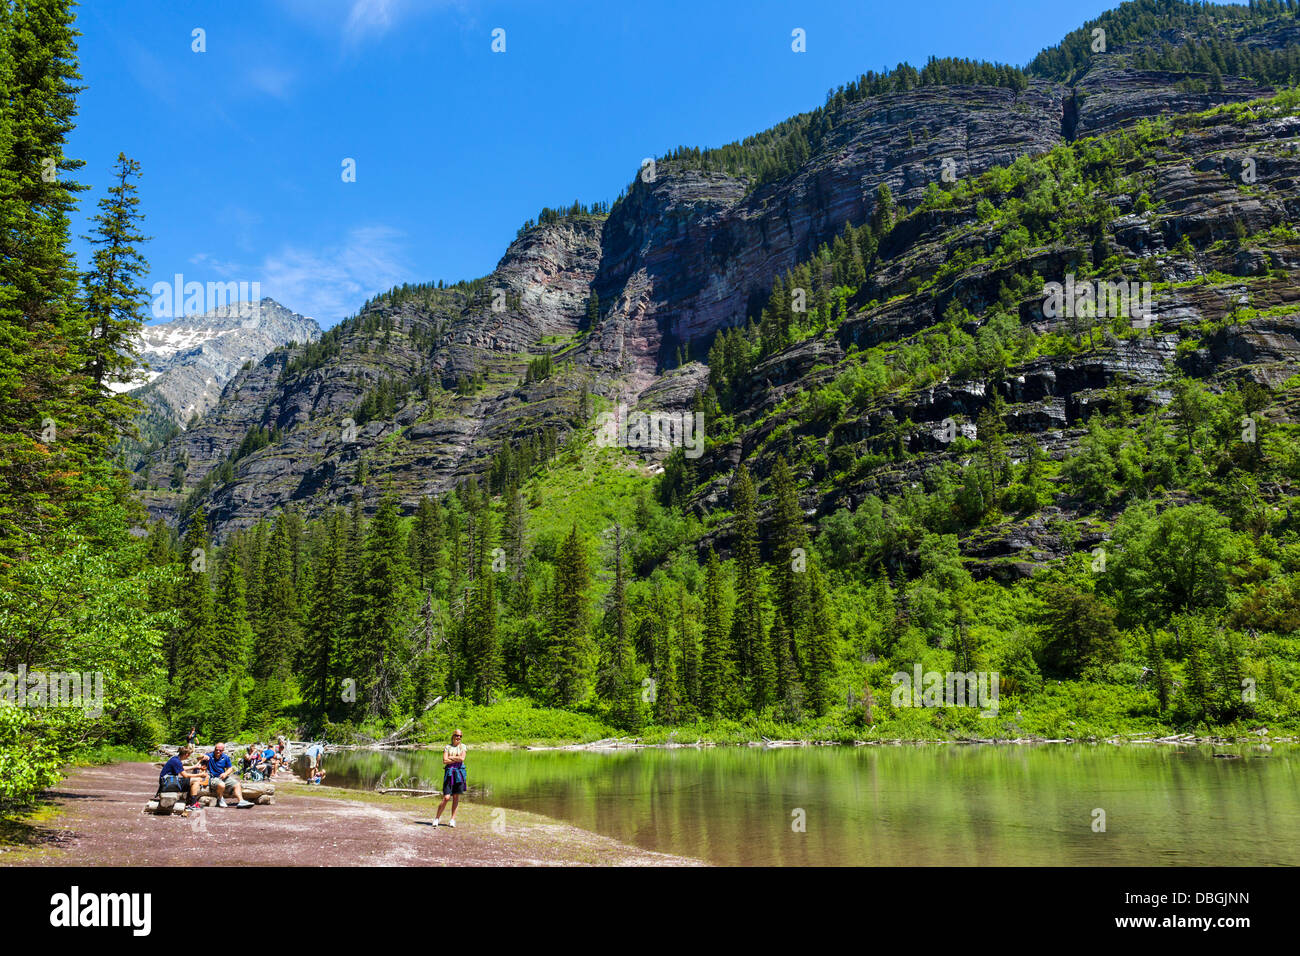 Walkers having a picnic on the shores of Avalanche Lake, Avalanche Lake Trail, Glacier National Park, Montana, USA Stock Photo